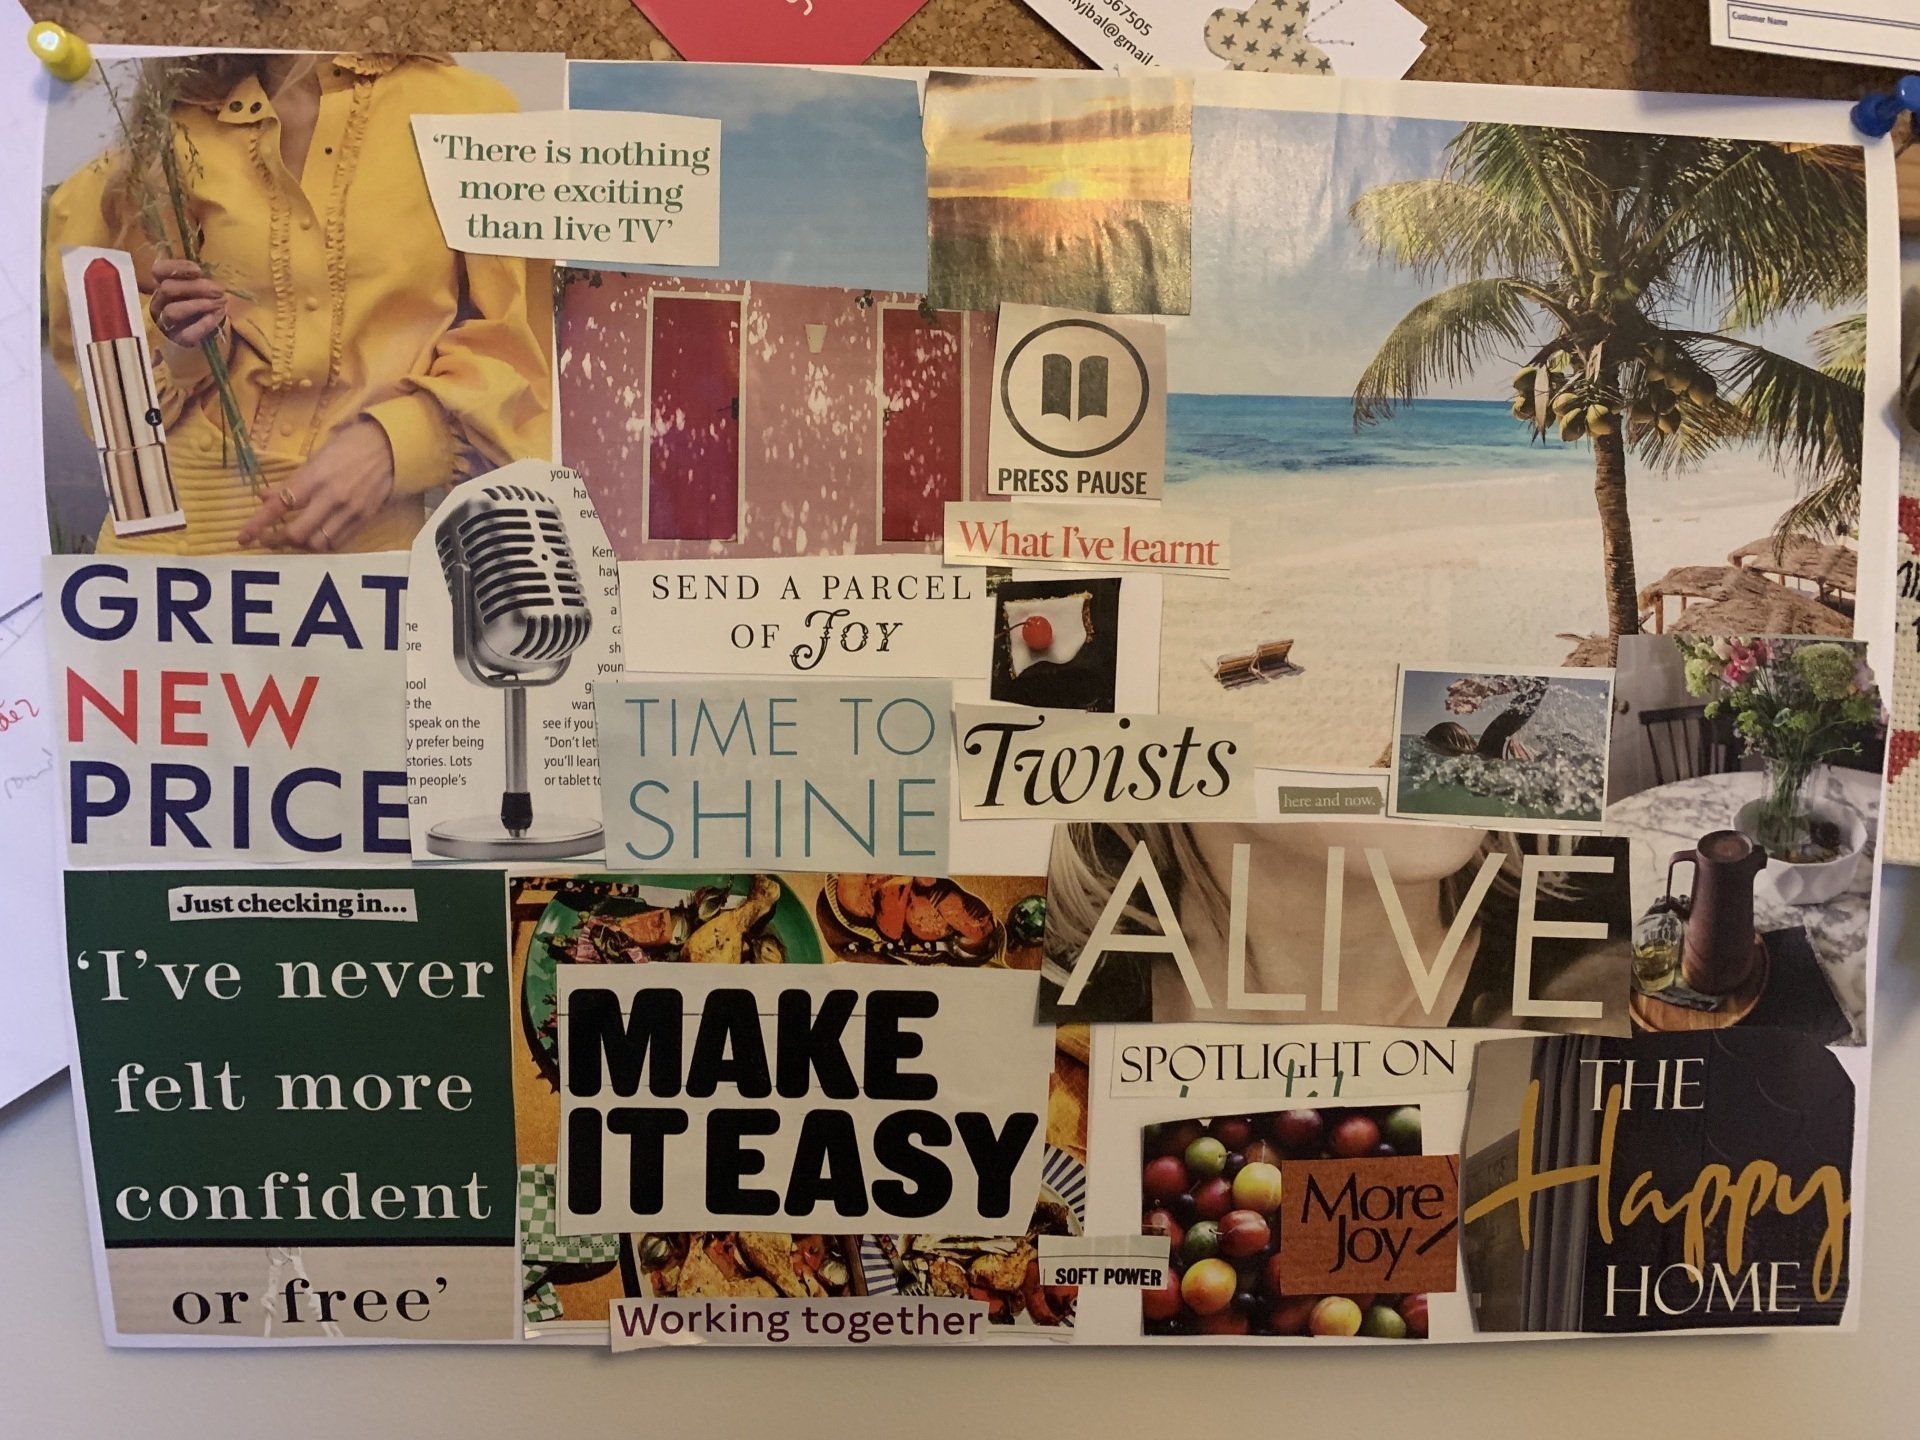 What is a vision board and how does it work?